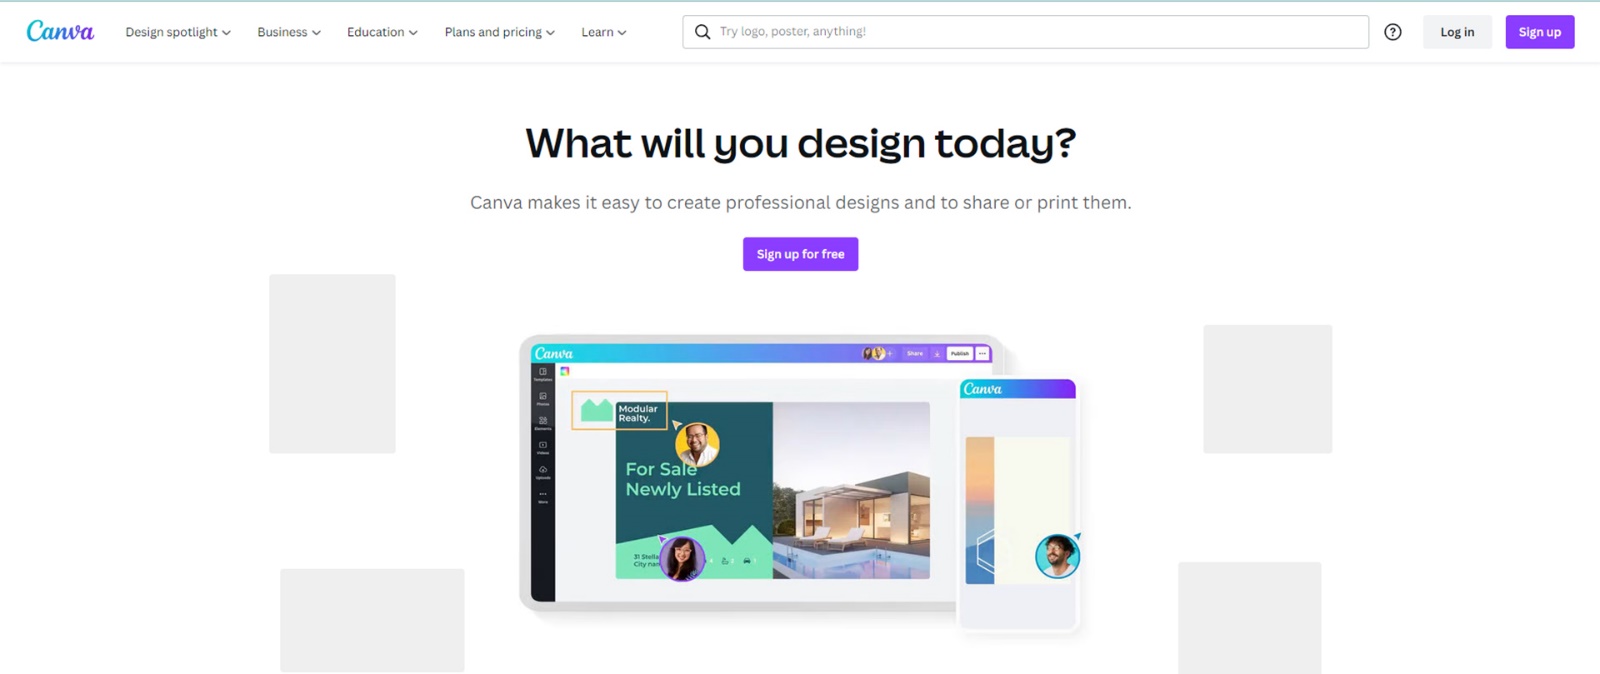 Screenshot of the introduction page of Canva that tells about its capabilities